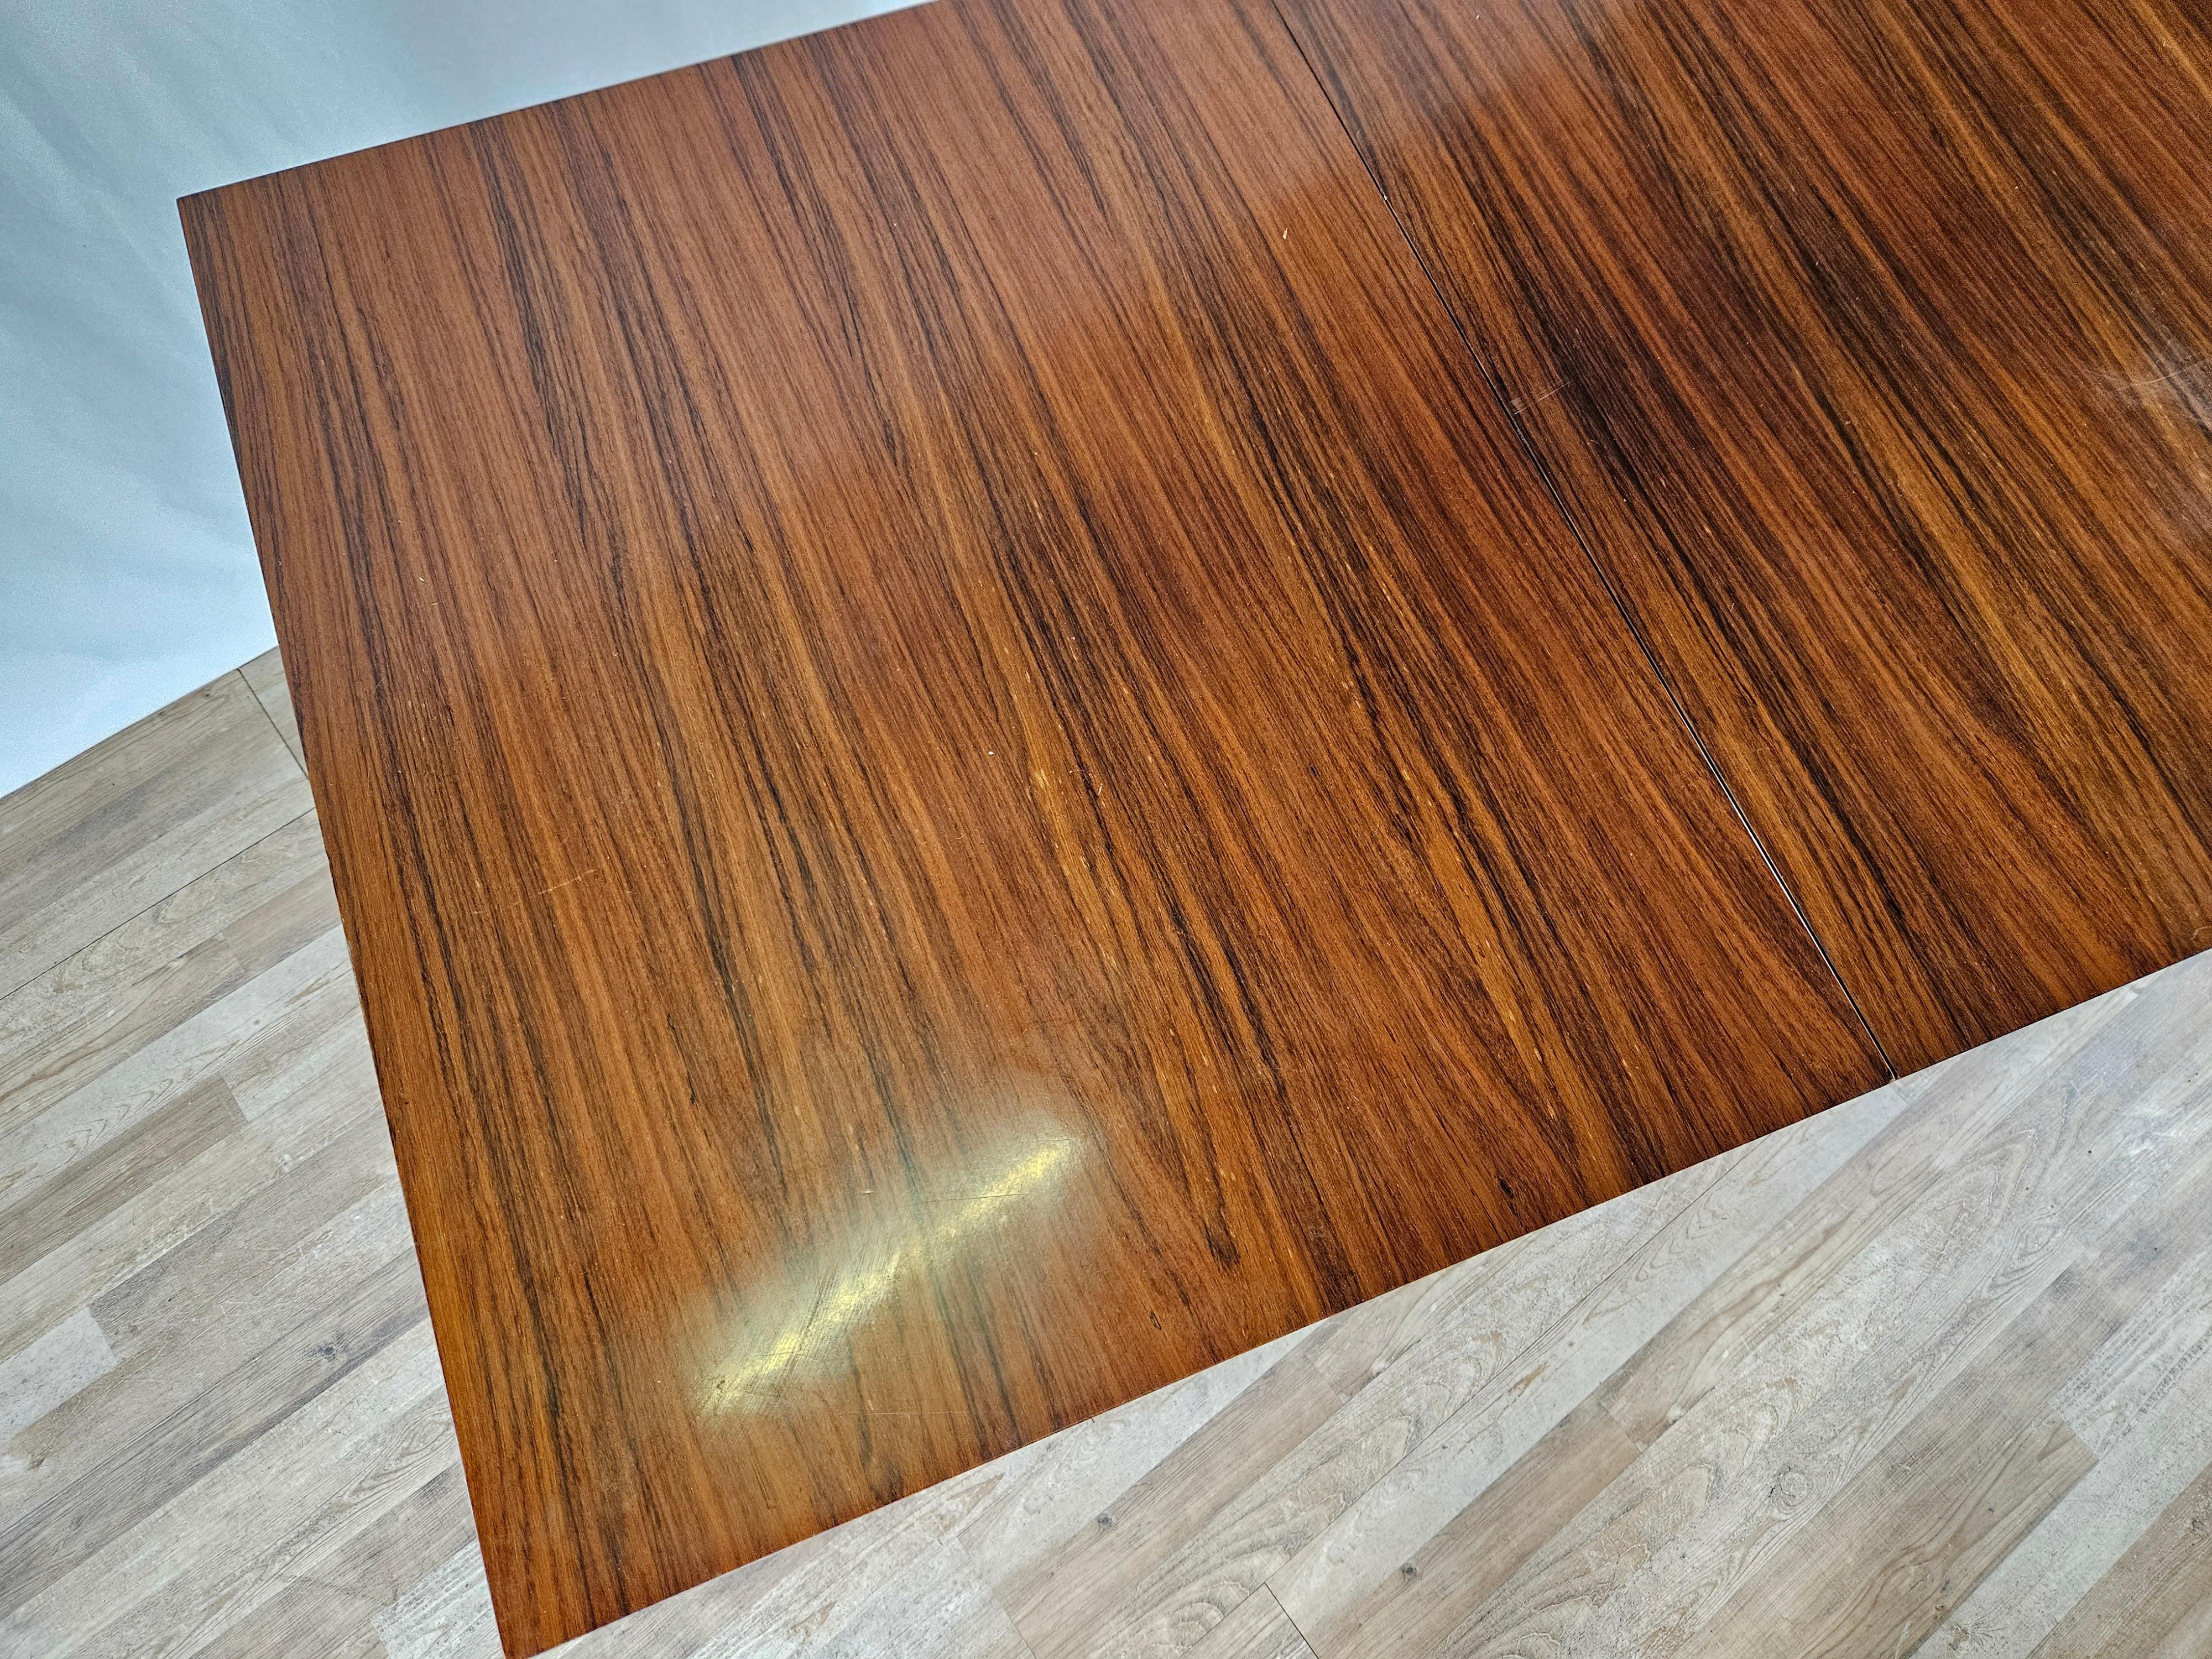 Italian-made 1960s laminate table in Scandinavian style, fine and elegant design for all environments.

The table is extendable so that it reaches a maximum width of 179.5cm, perfect for a comfortable 6-seater or narrow 8-seater.

Polished to